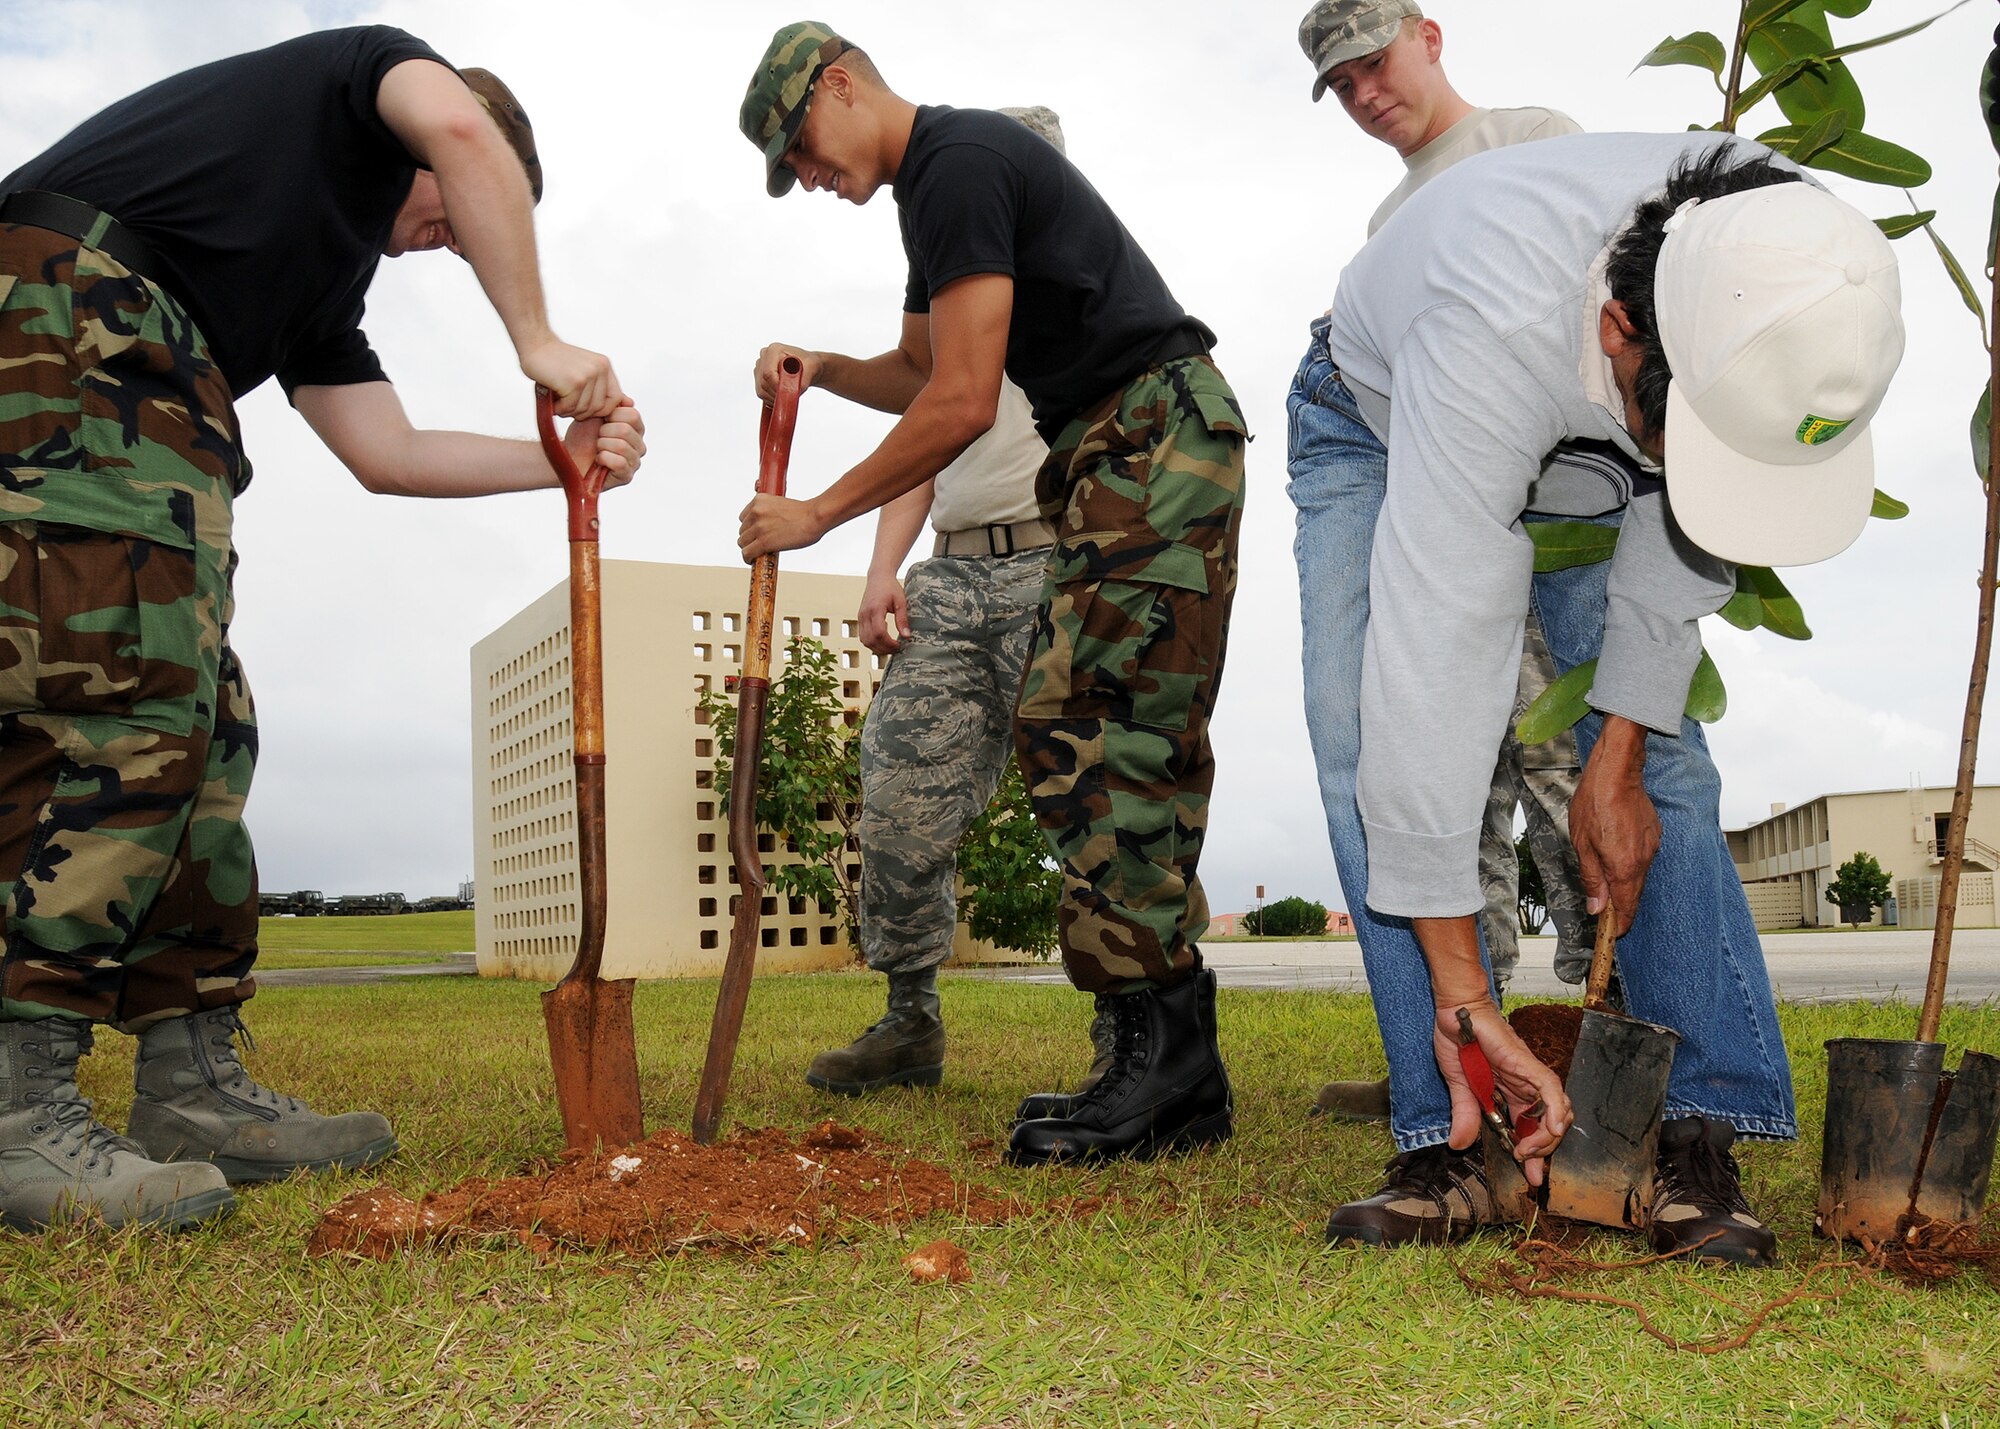 ANDERSEN AIR FORCE BASE, Guam -Airman Justin Scott (left) and Airman Dion Battisti (right) both 36th Civil Engineer Squadron Firefighters dig a hole measuring one foot deep while Mr. Tedy Magno 36th CES Ground Maintenance cuts the excess roots of the tree in preparation for planting at the First Term Airmen's Center here Dec. 11. This is the first Going Green project ever conducted by FTAC Airmen. (U.S. Air Force photo by Senior Airman Nichelle Griffiths)